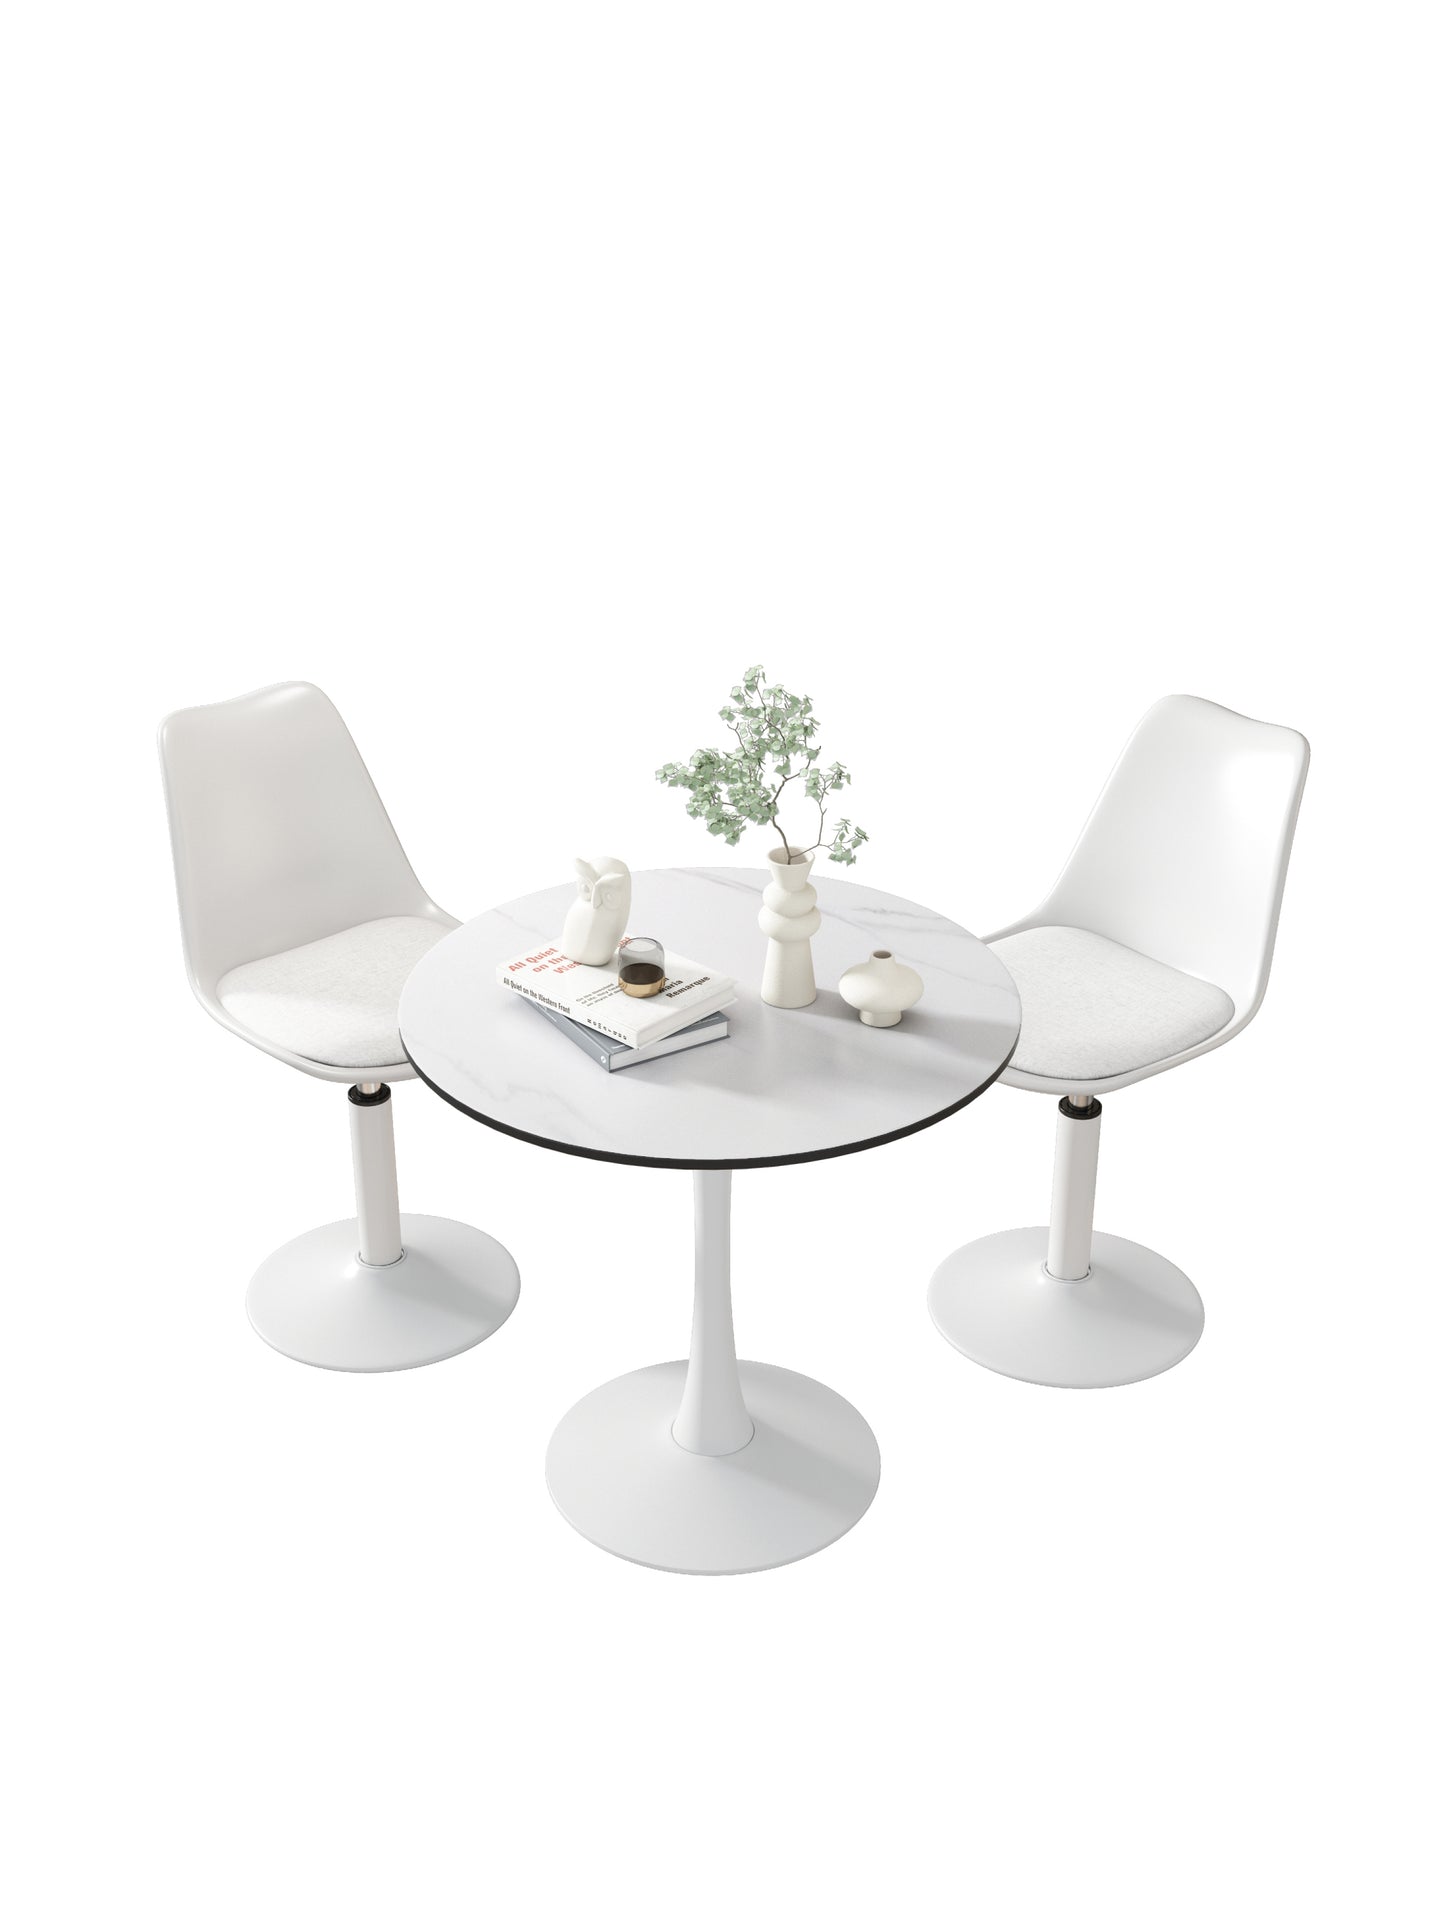 TULIP DINING TABLE ,32IN ROUND, WHITE, Mable black, 1pc per ctn